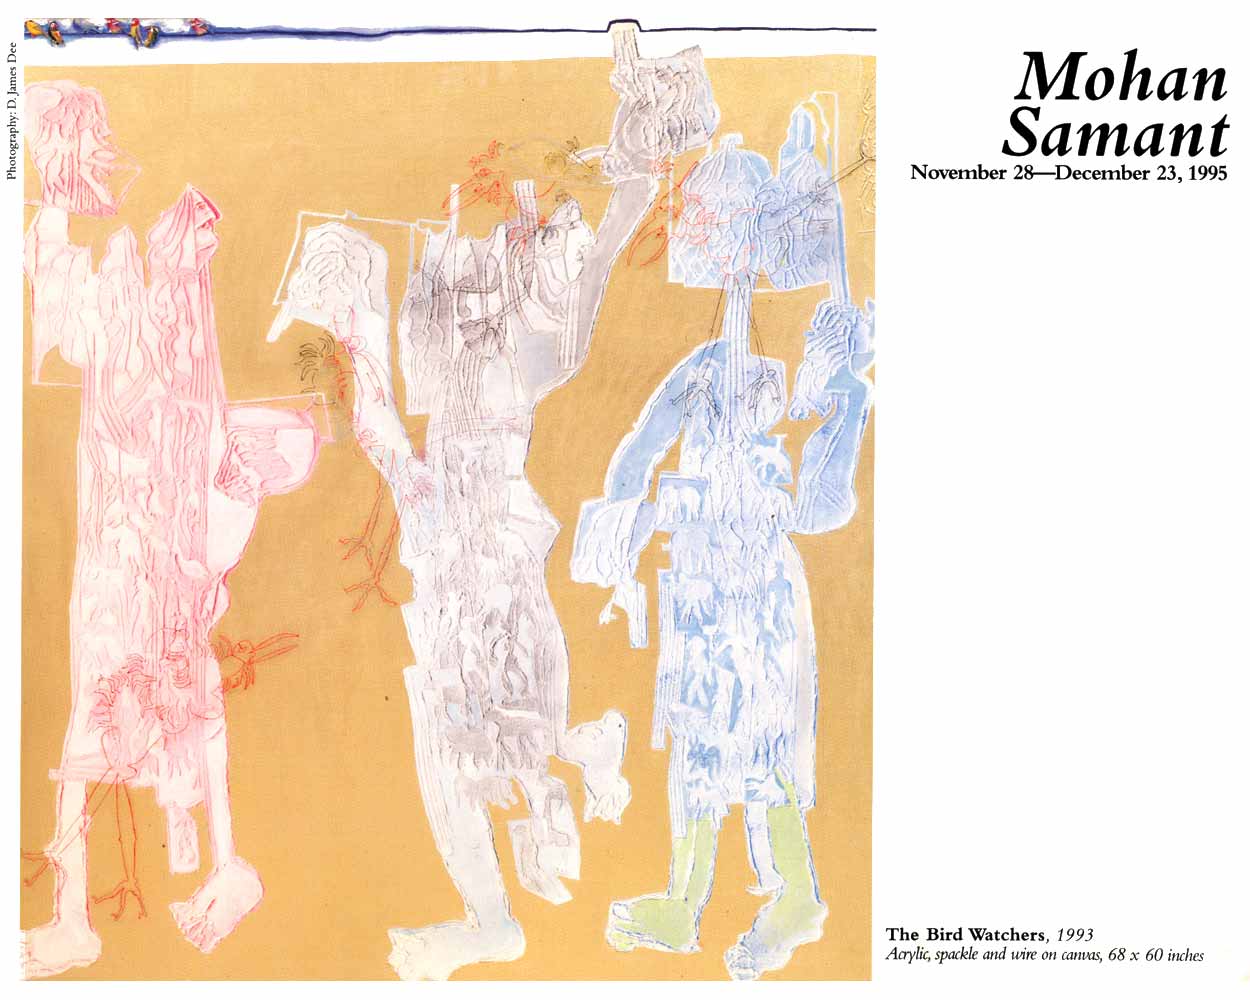 Excerpts from exhibition leaflet for "Mohan Samant", Gallery B.A.I.